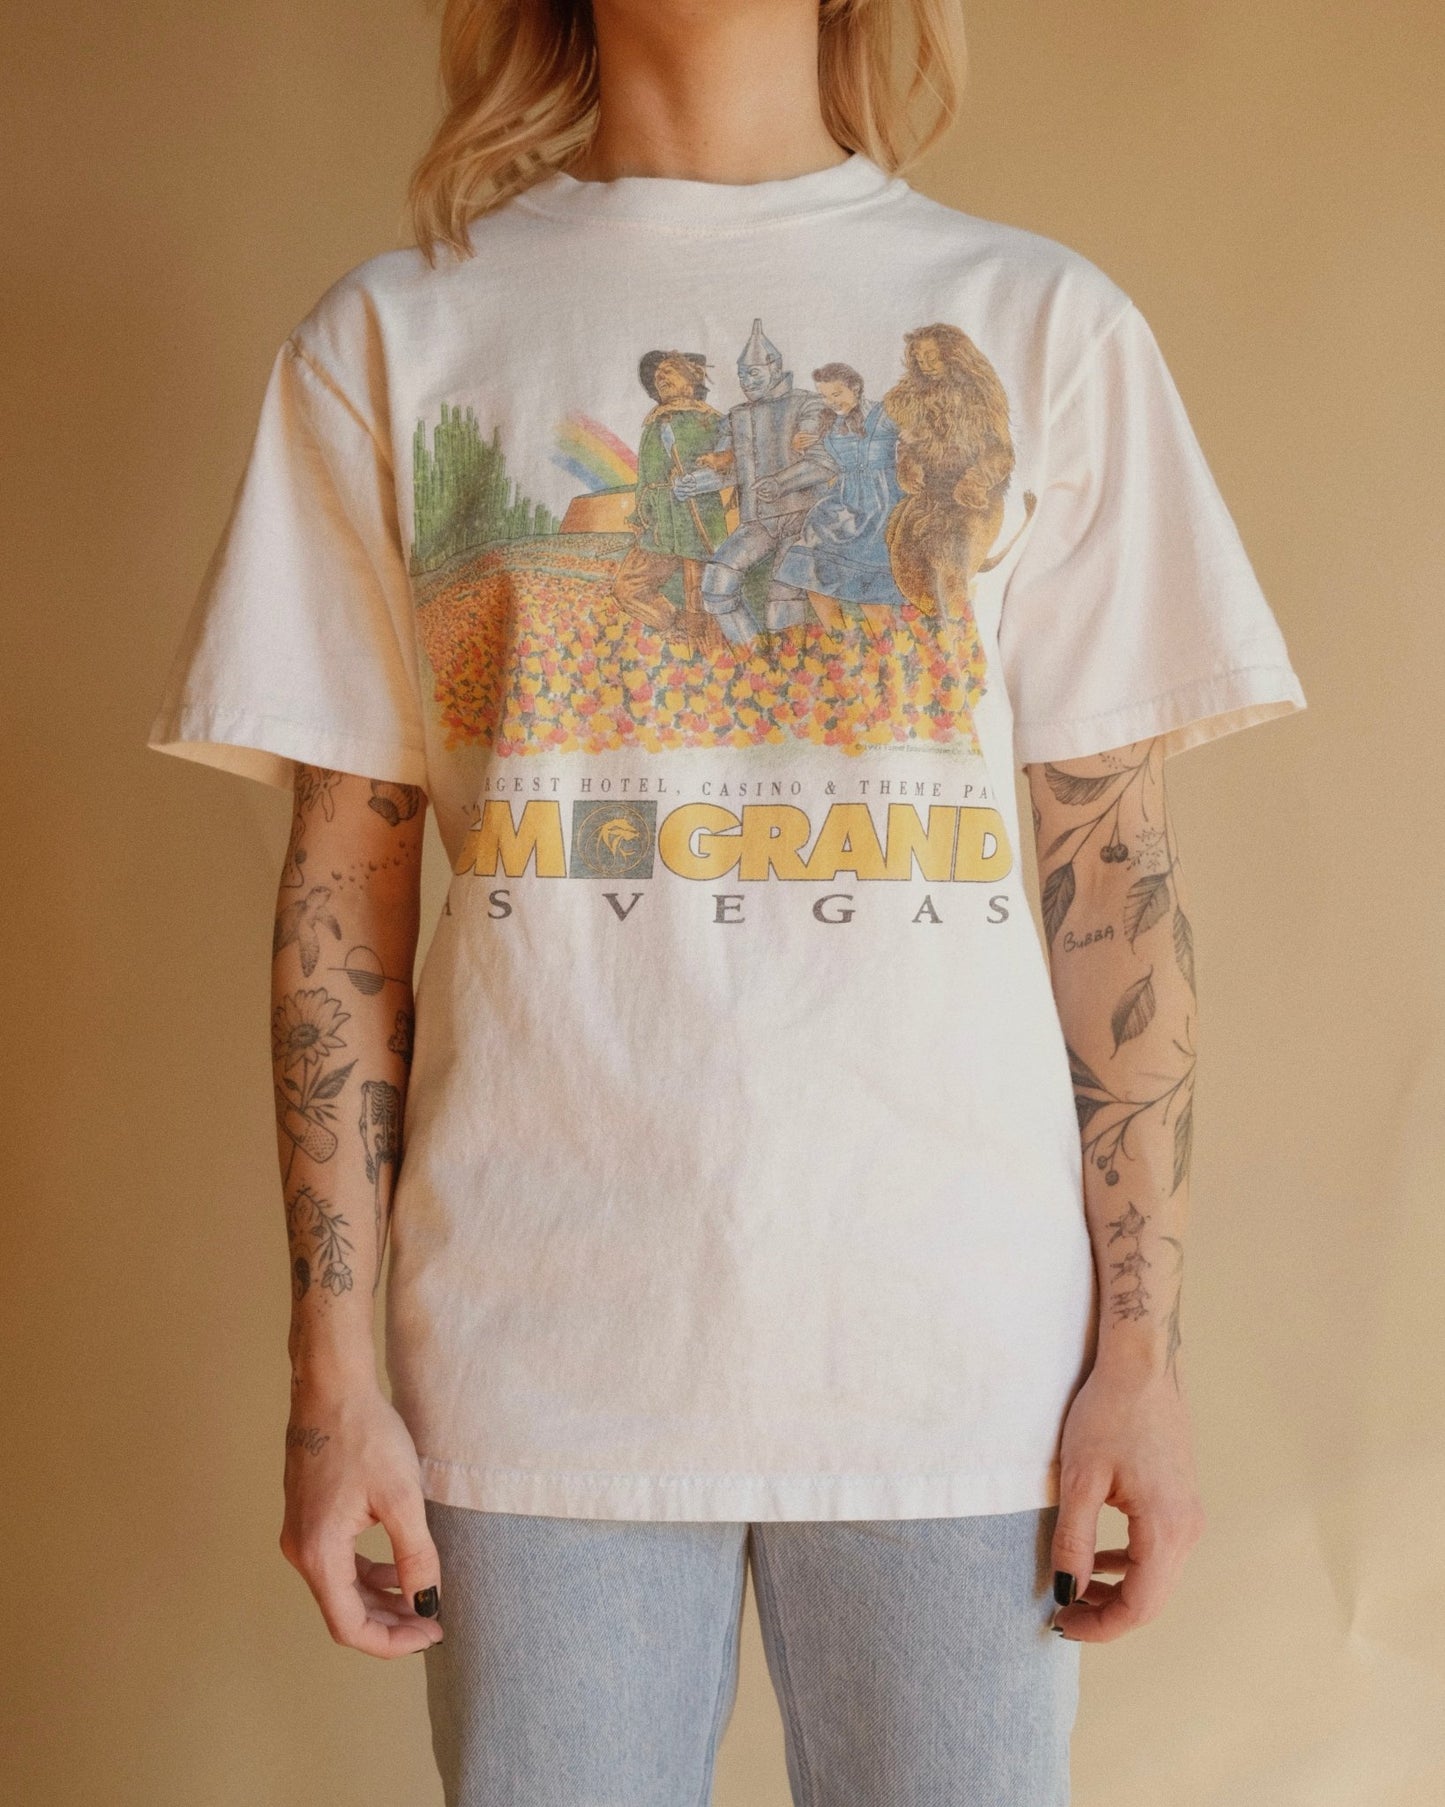 1993 MGM Grand Wizard of Oz Tee